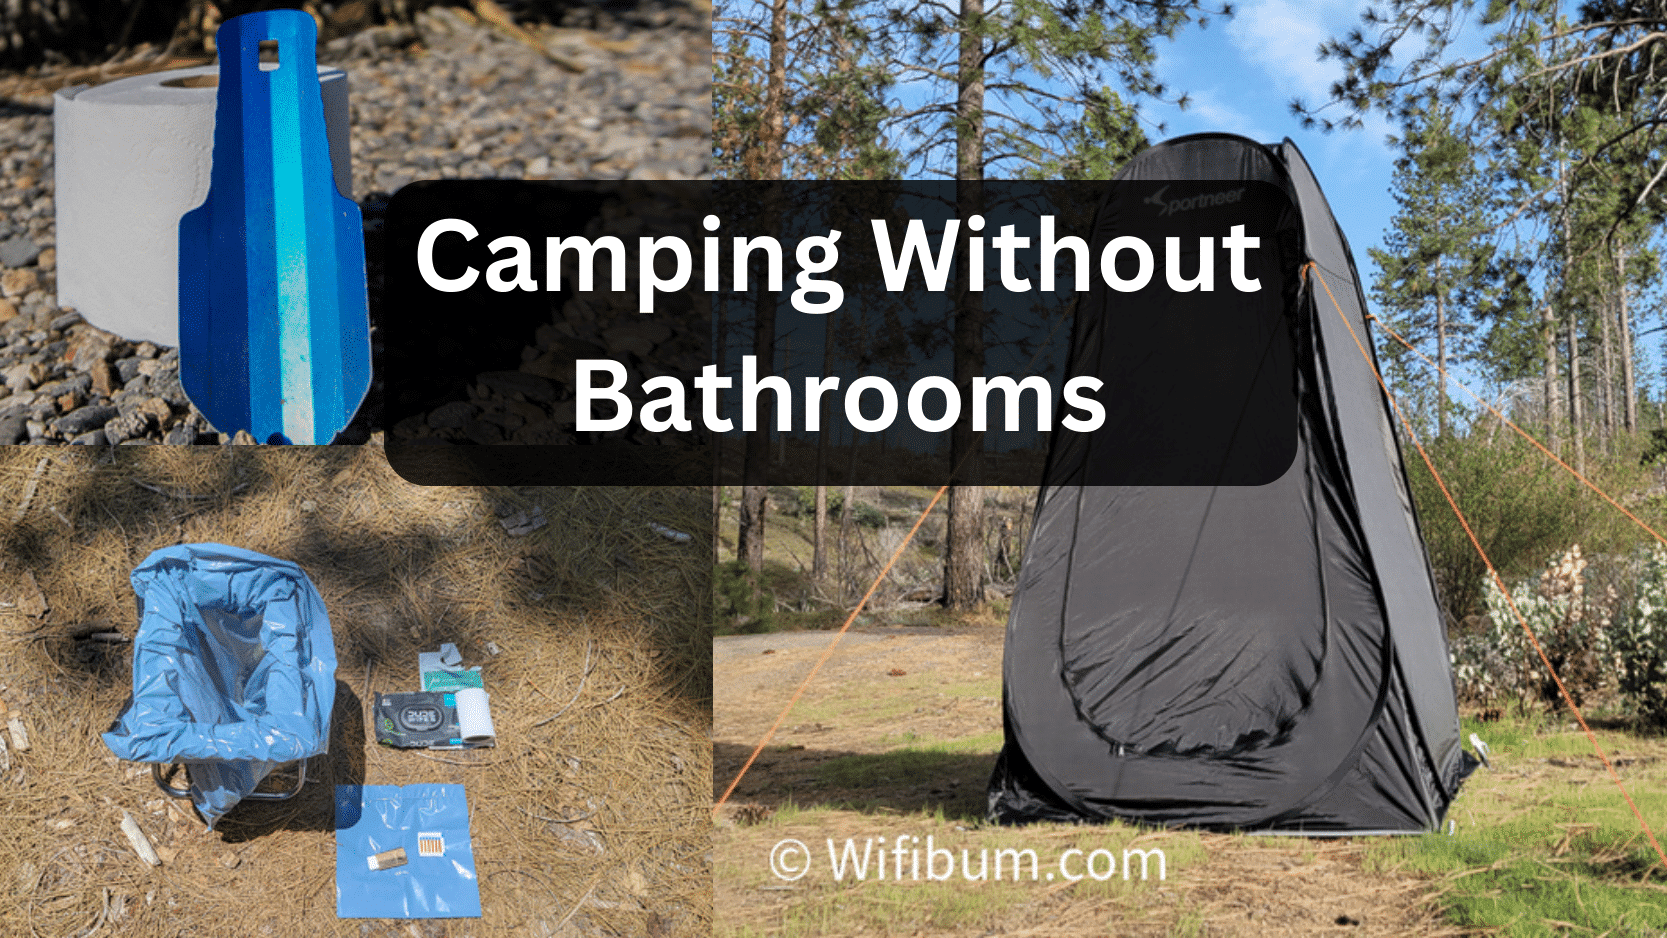 Camping Without Bathrooms: Where Do I Poop?